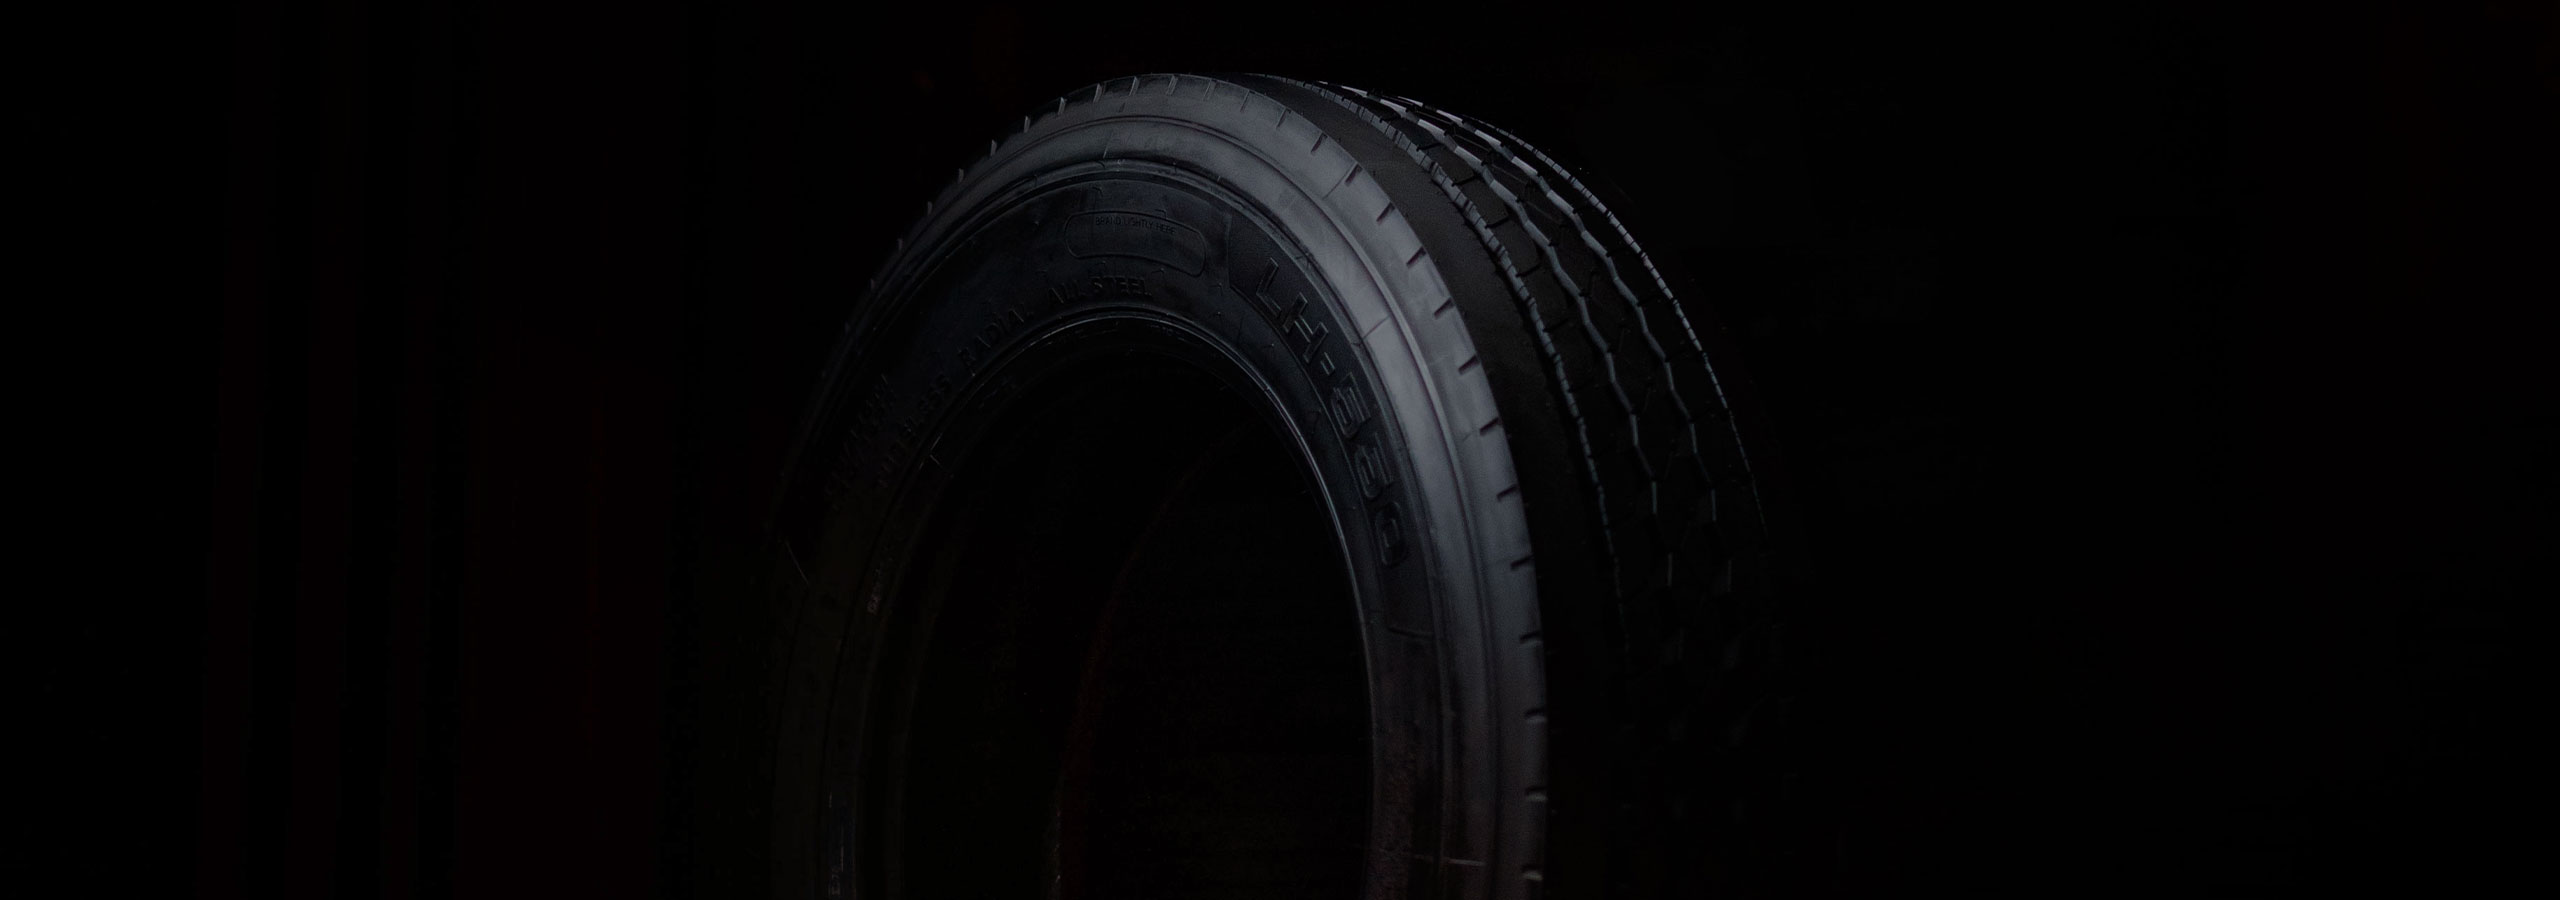 Commercial Truck Tires Image 1